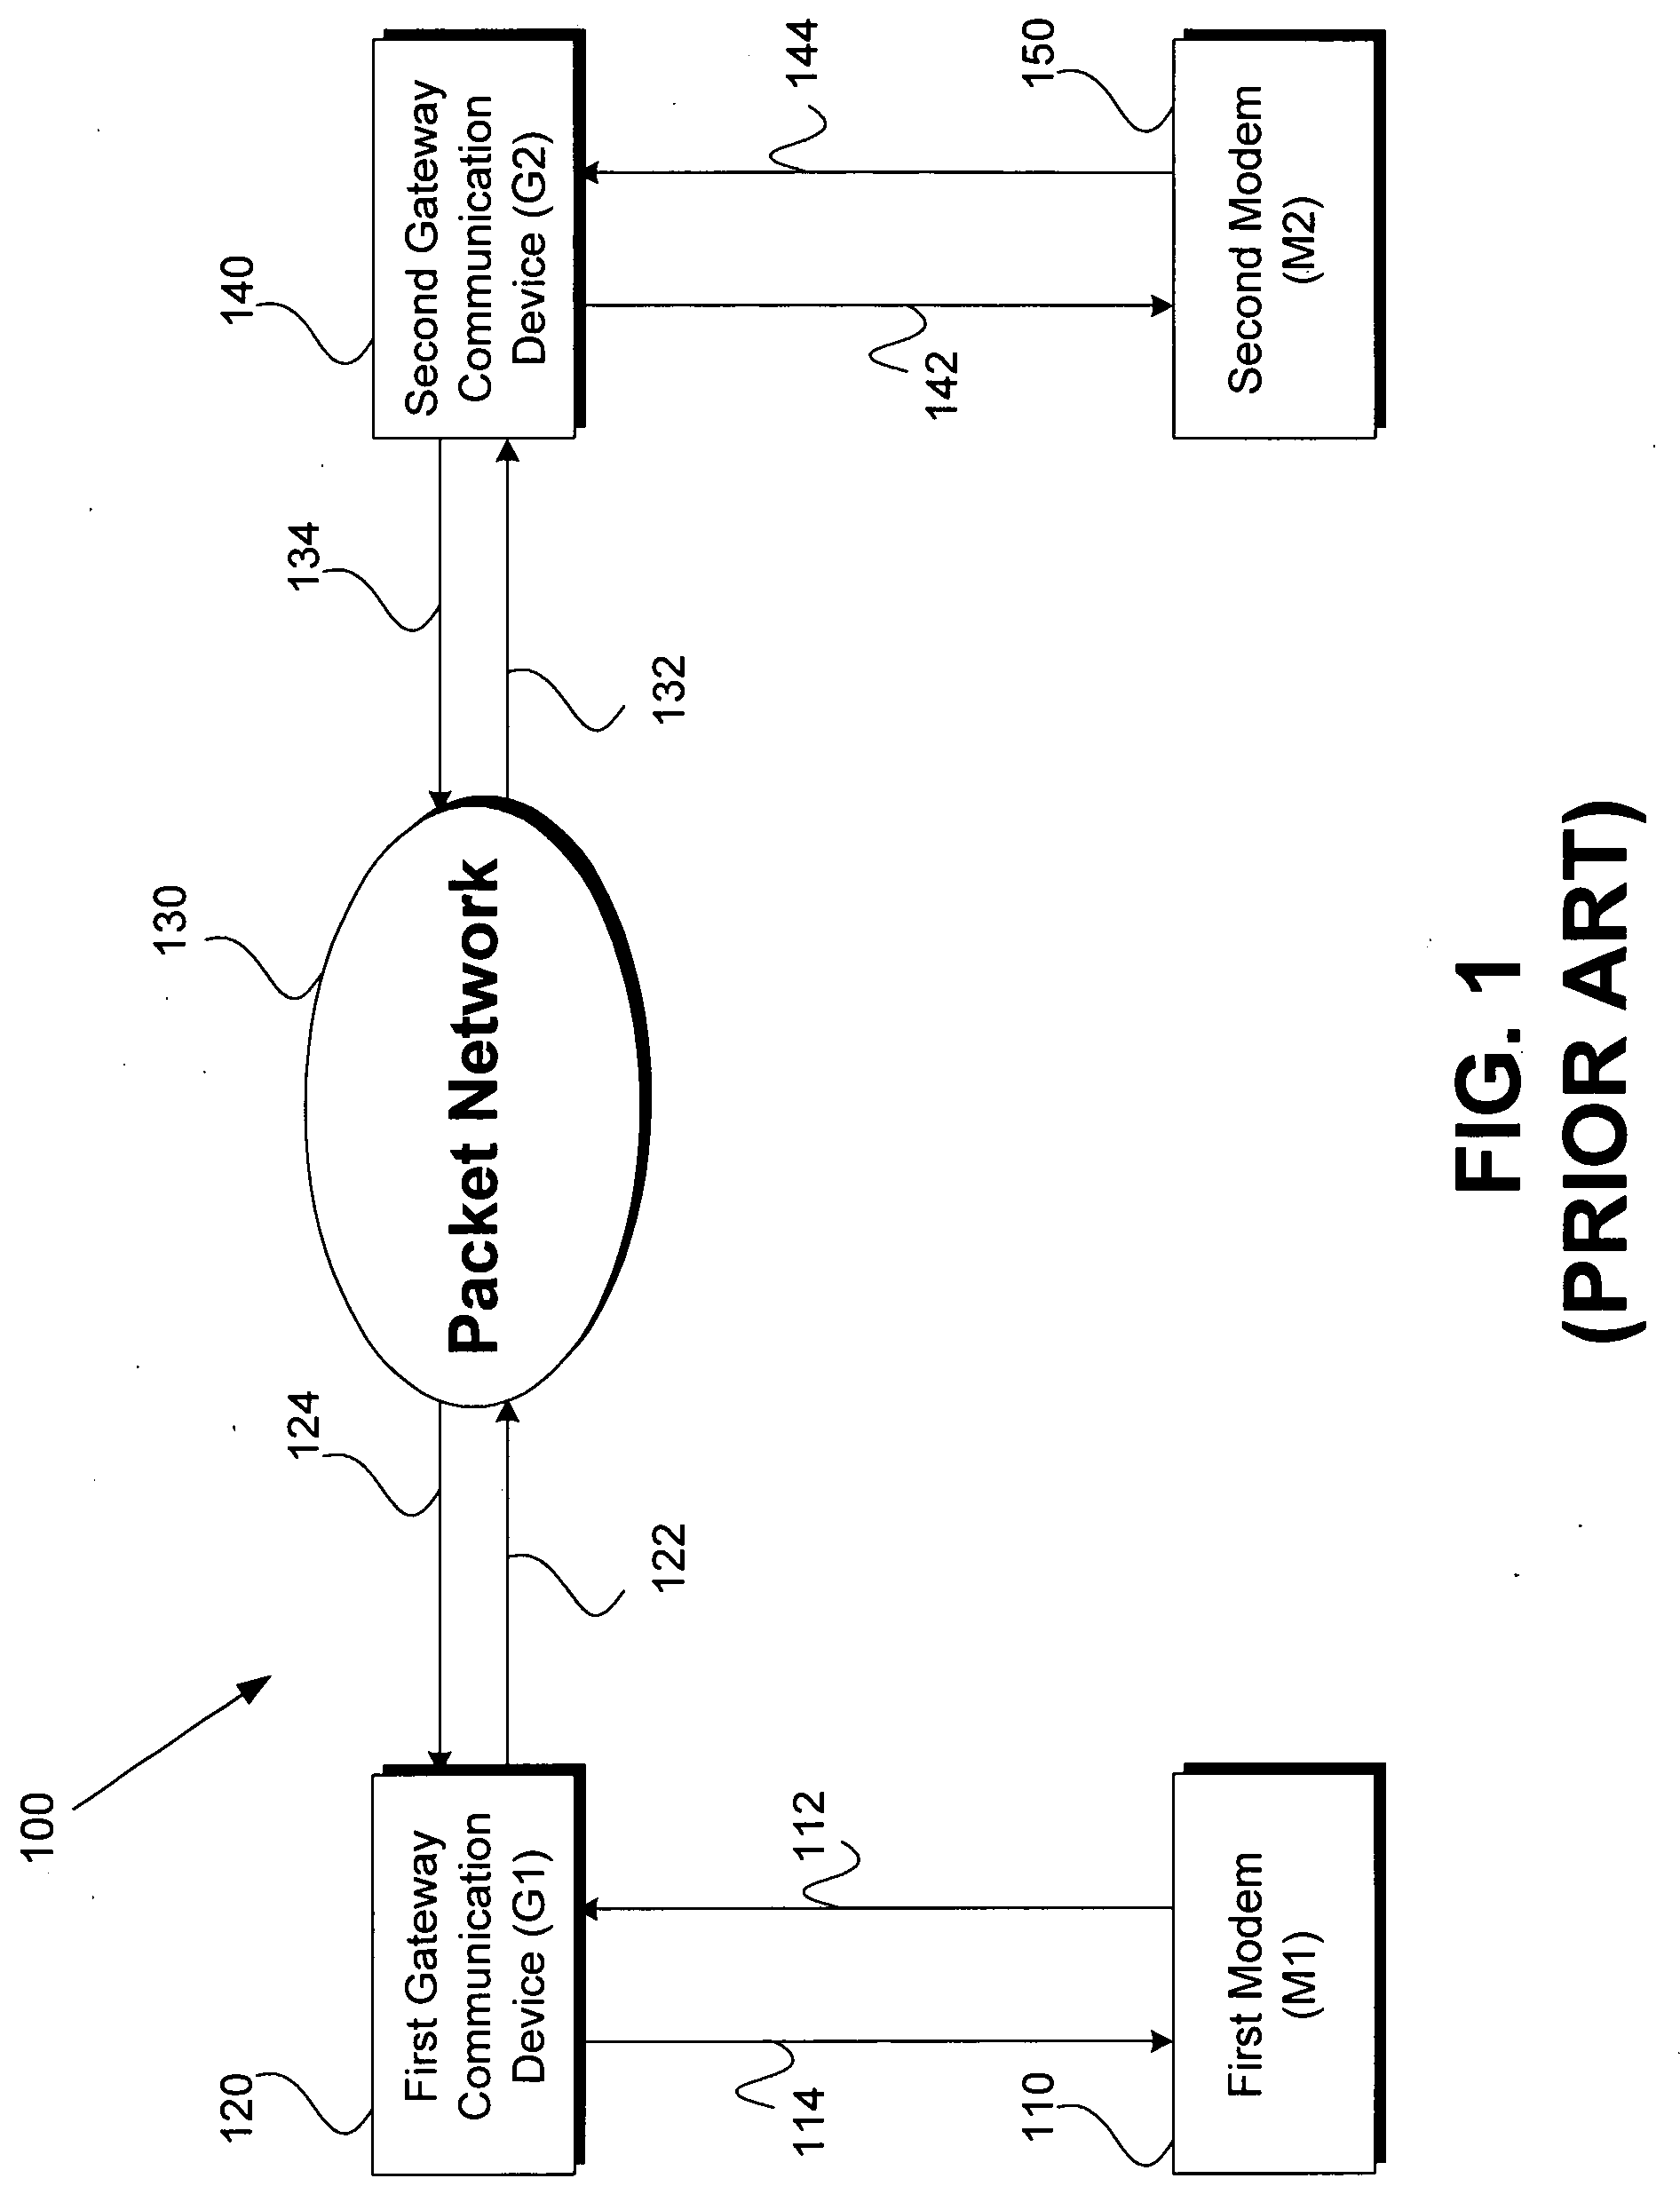 Method and system for configuring gateways to facilitate a modem connection over a packet network